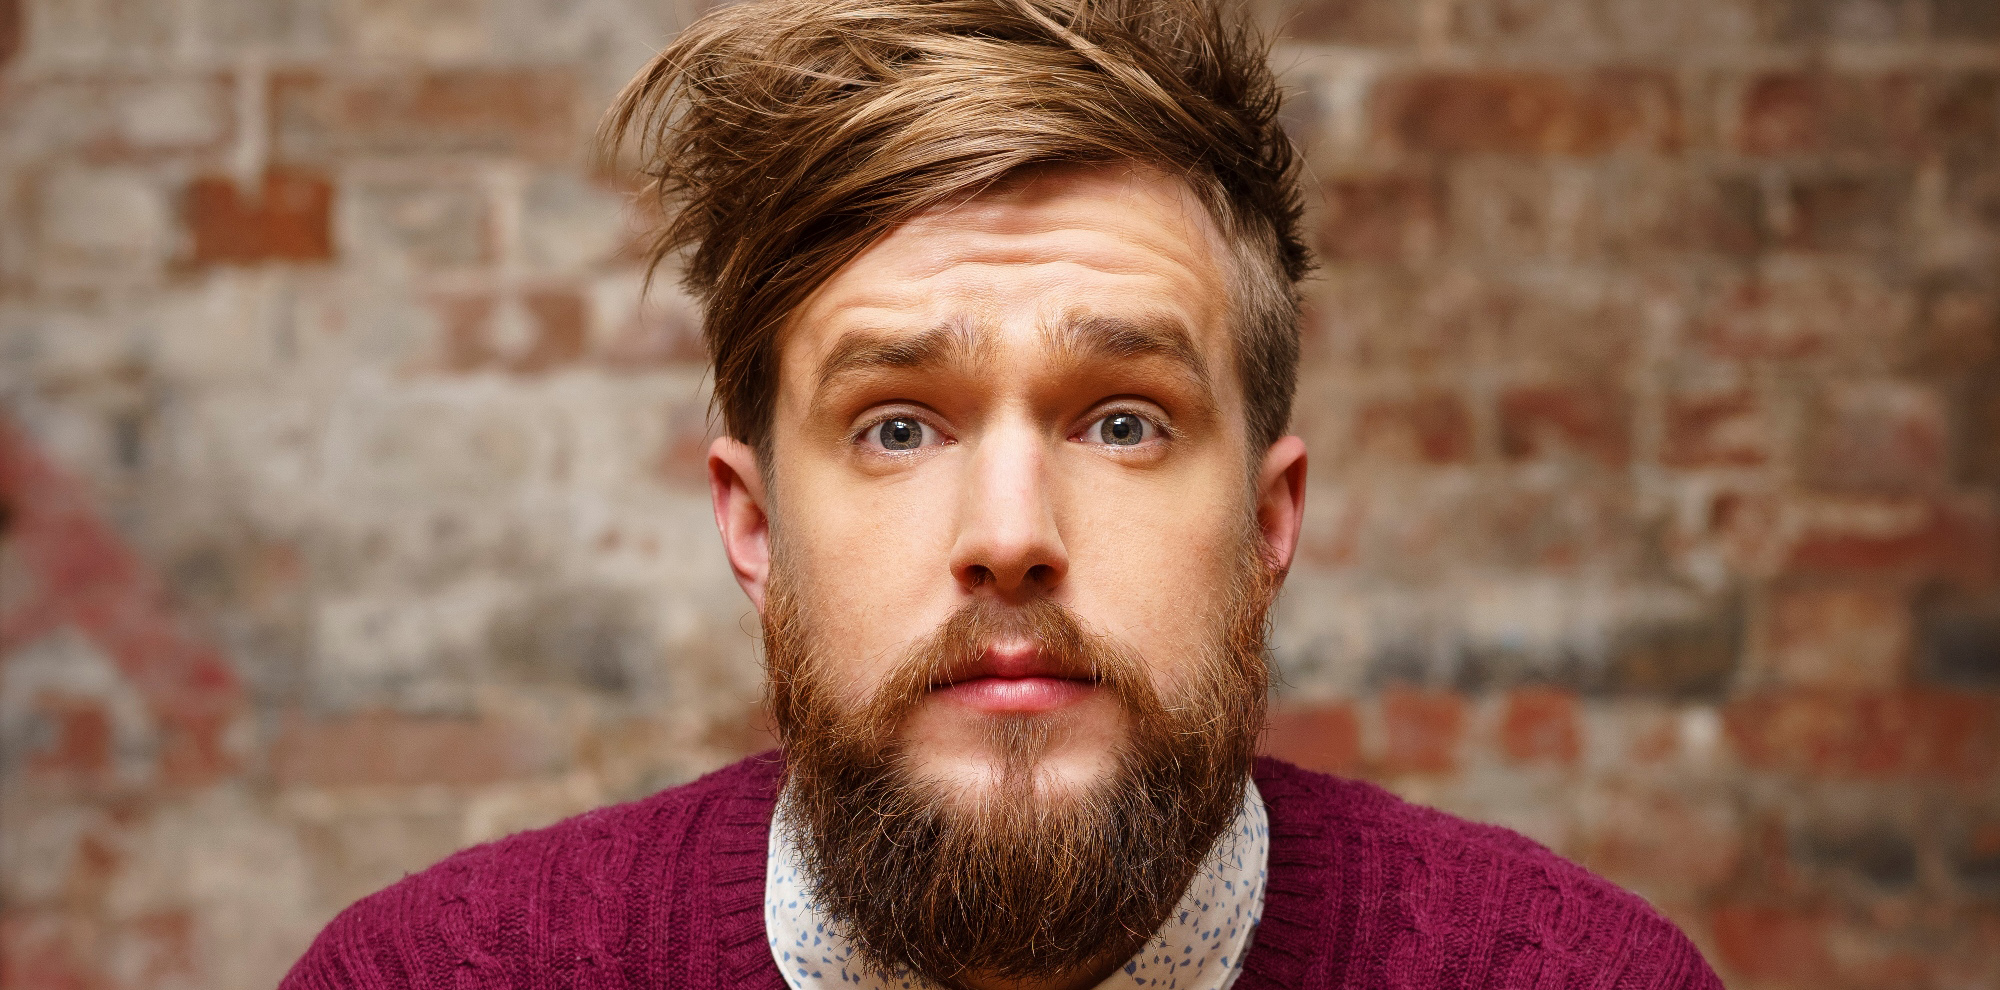 IAIN STIRLING- TOUCHY FEELY